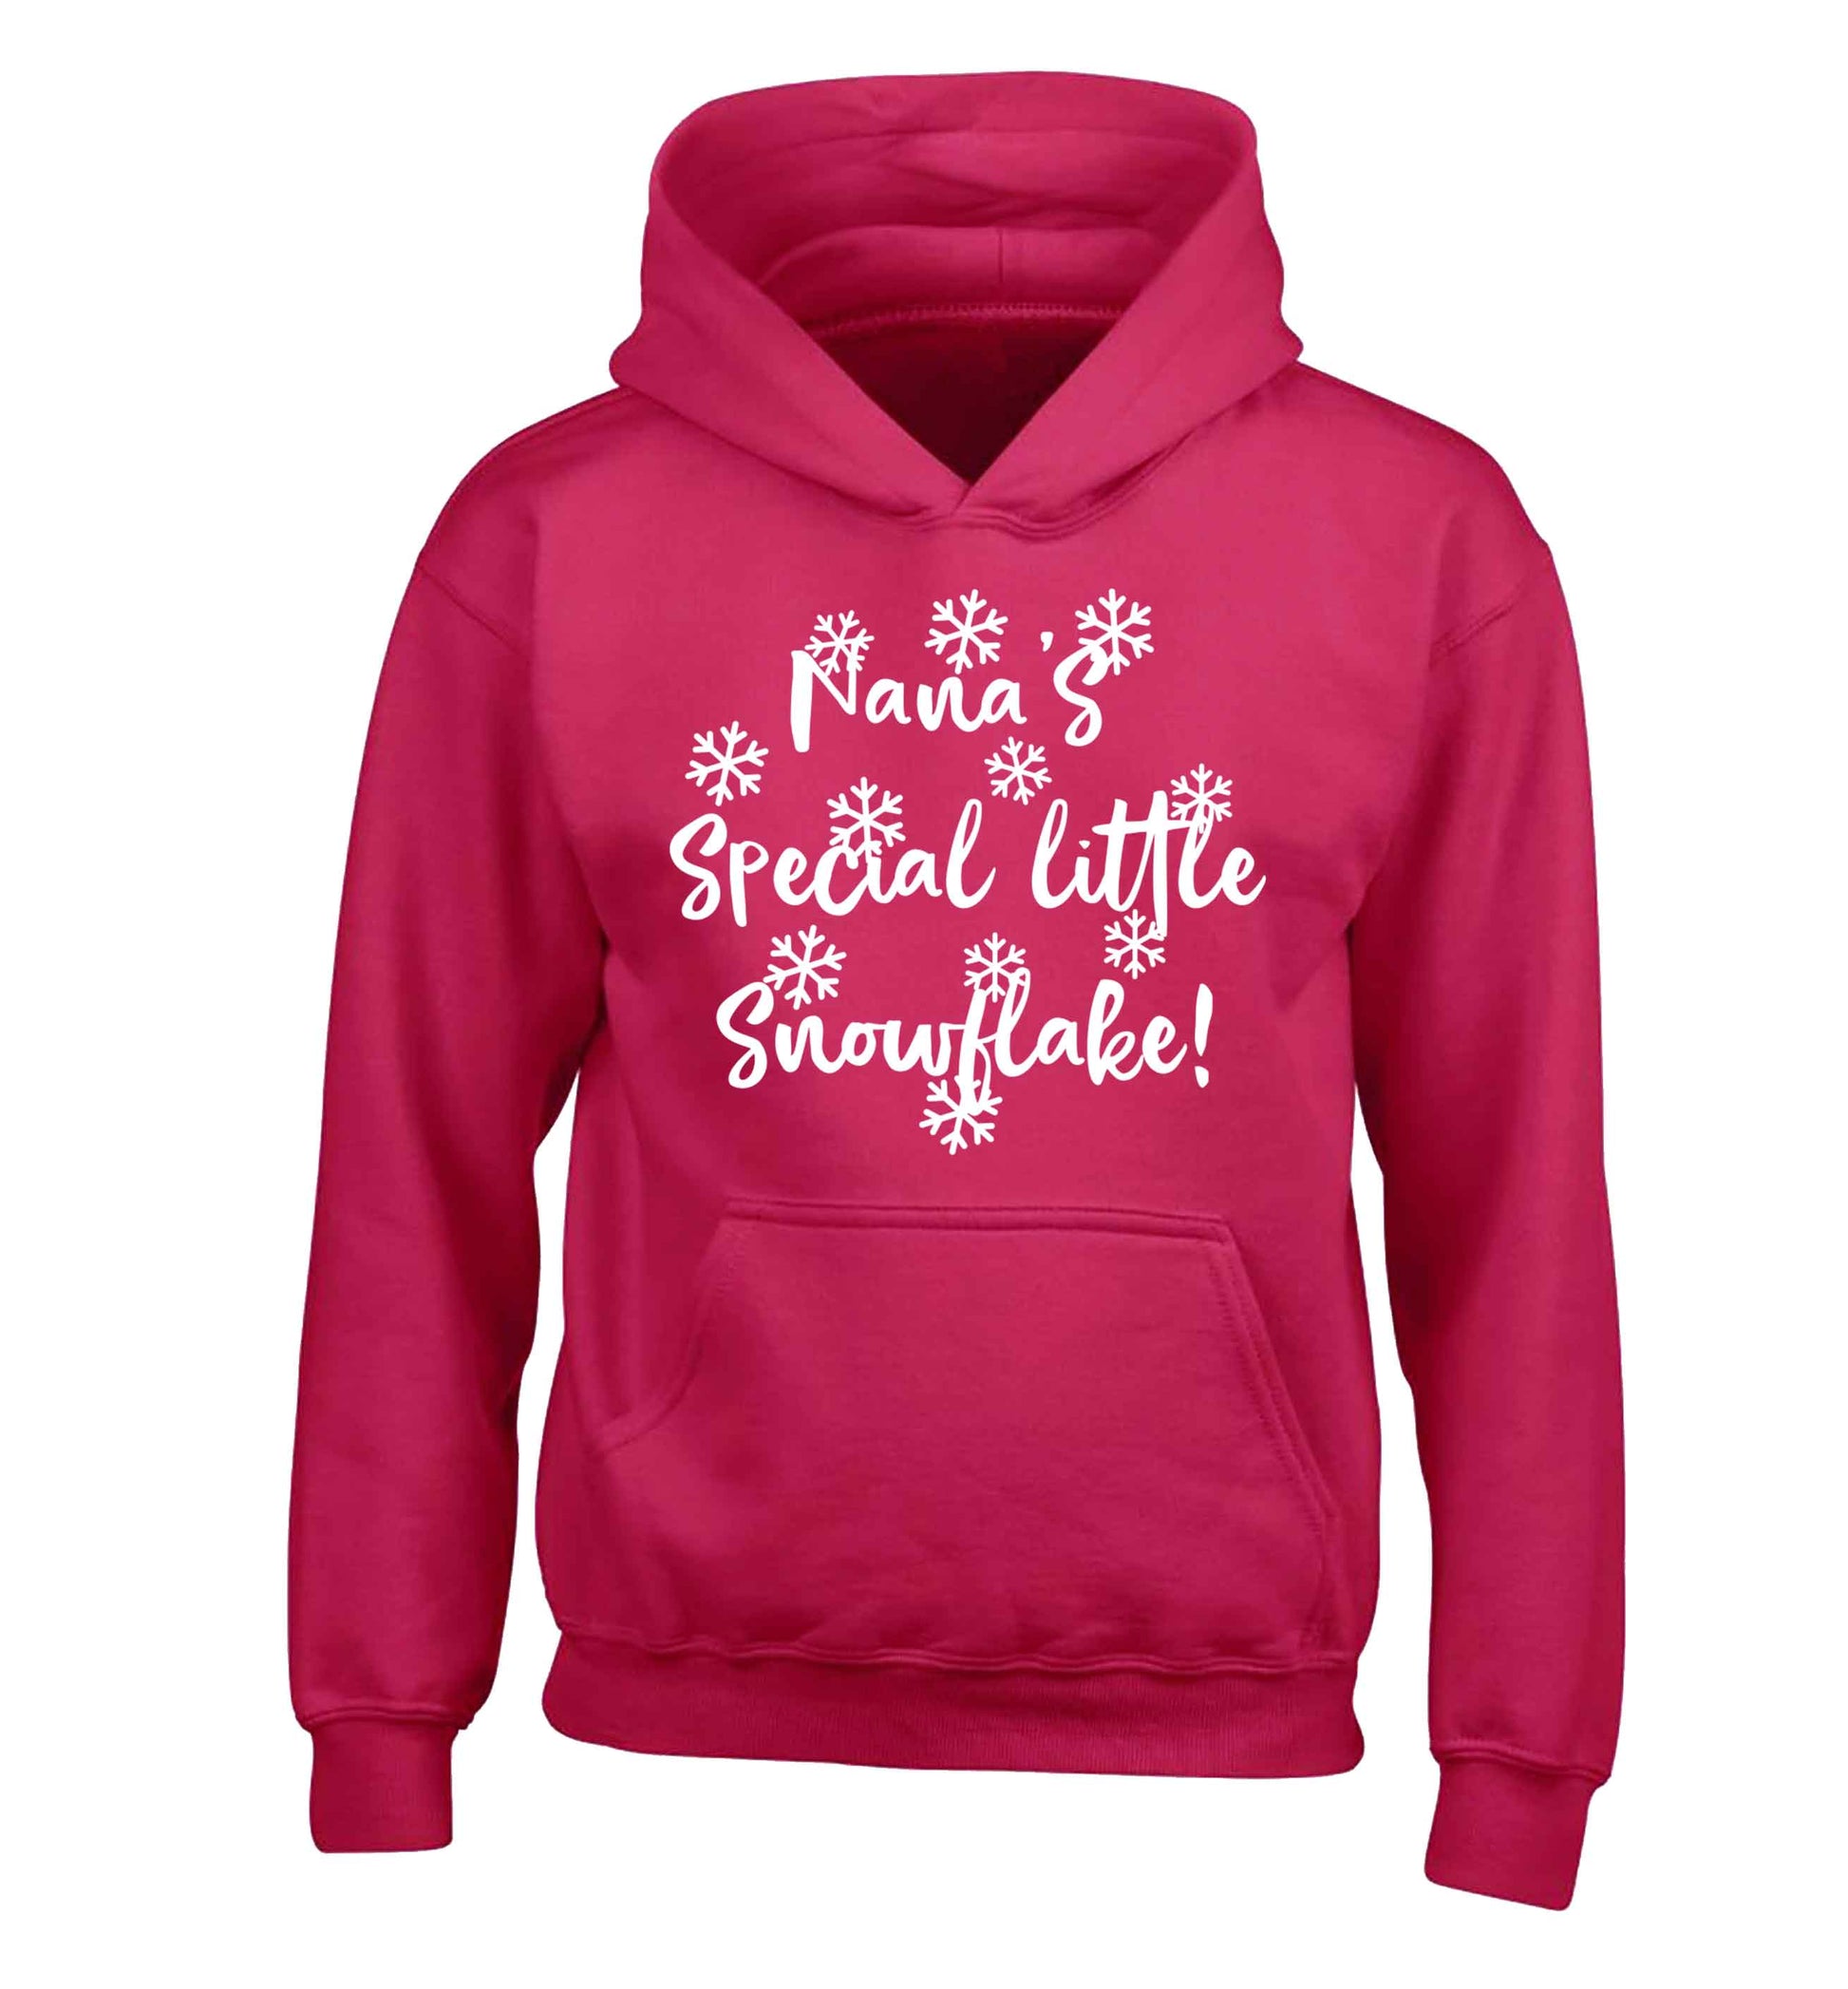 Nana's special little snowflake children's pink hoodie 12-13 Years